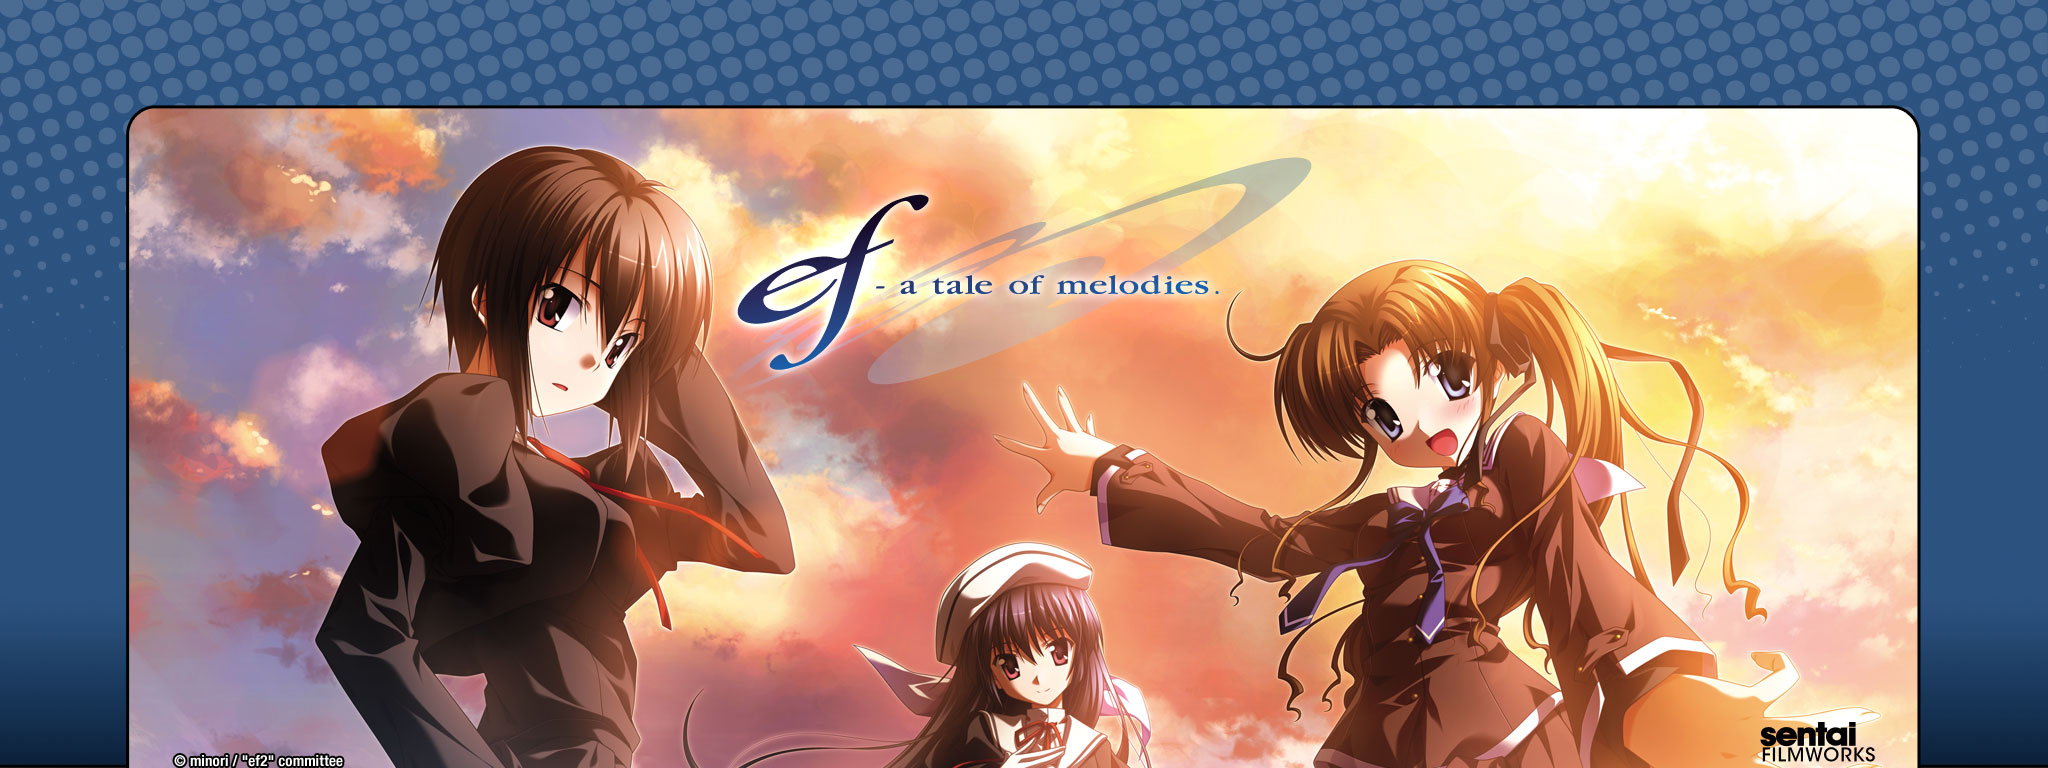 Title Art for ef ~ a tale of melodies